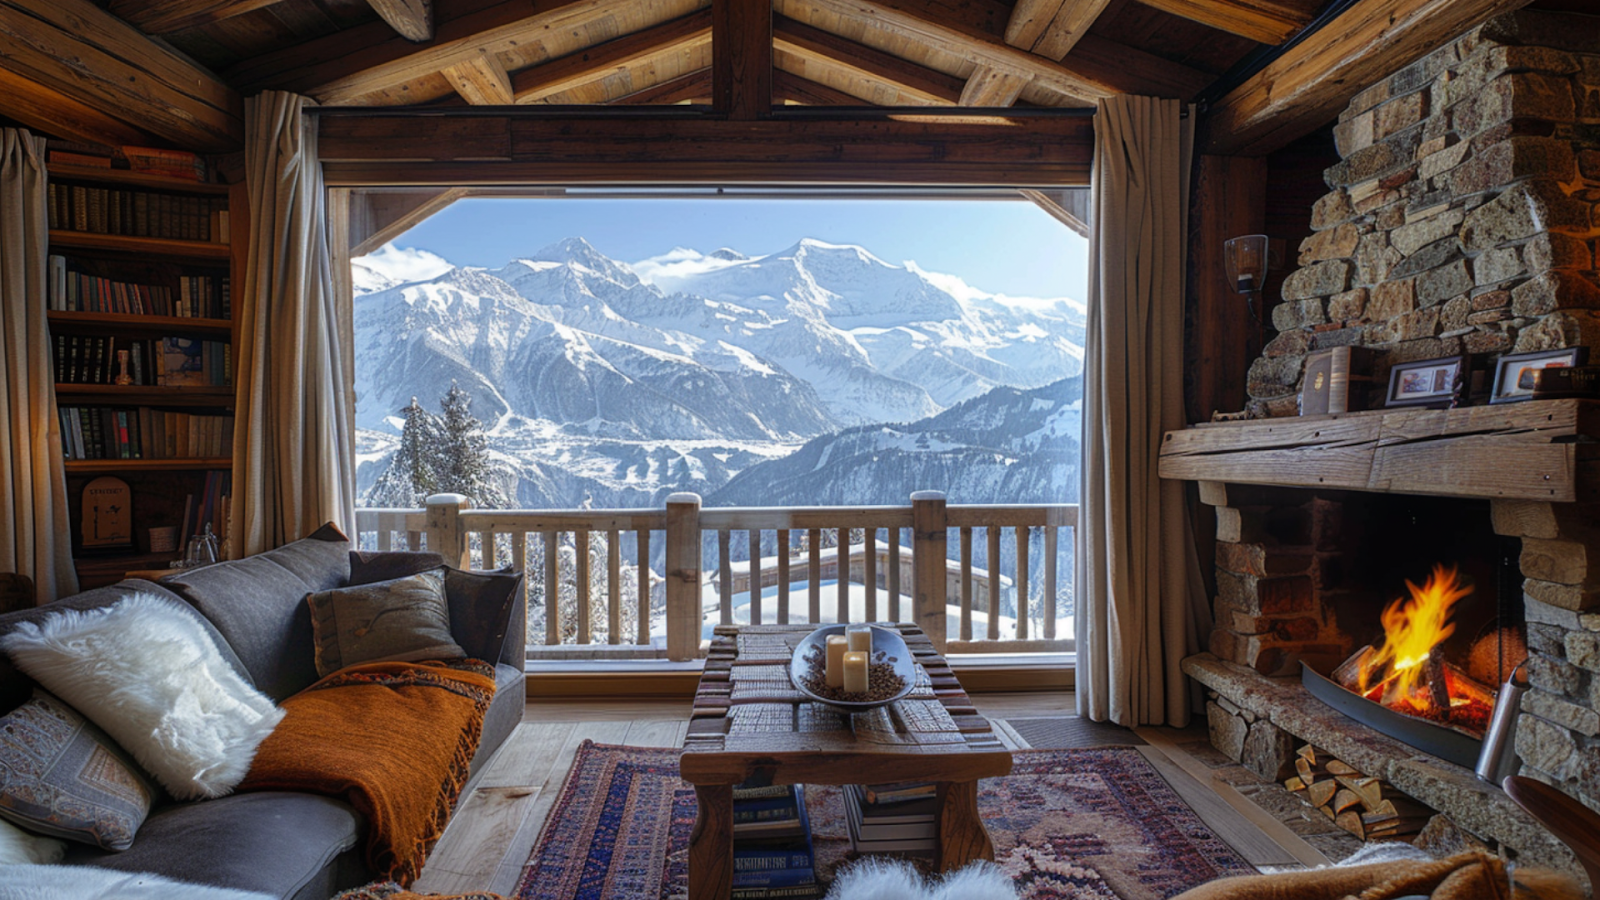 A ski chalet in Courchevel with a fireplace and panoramic views of the French Alps